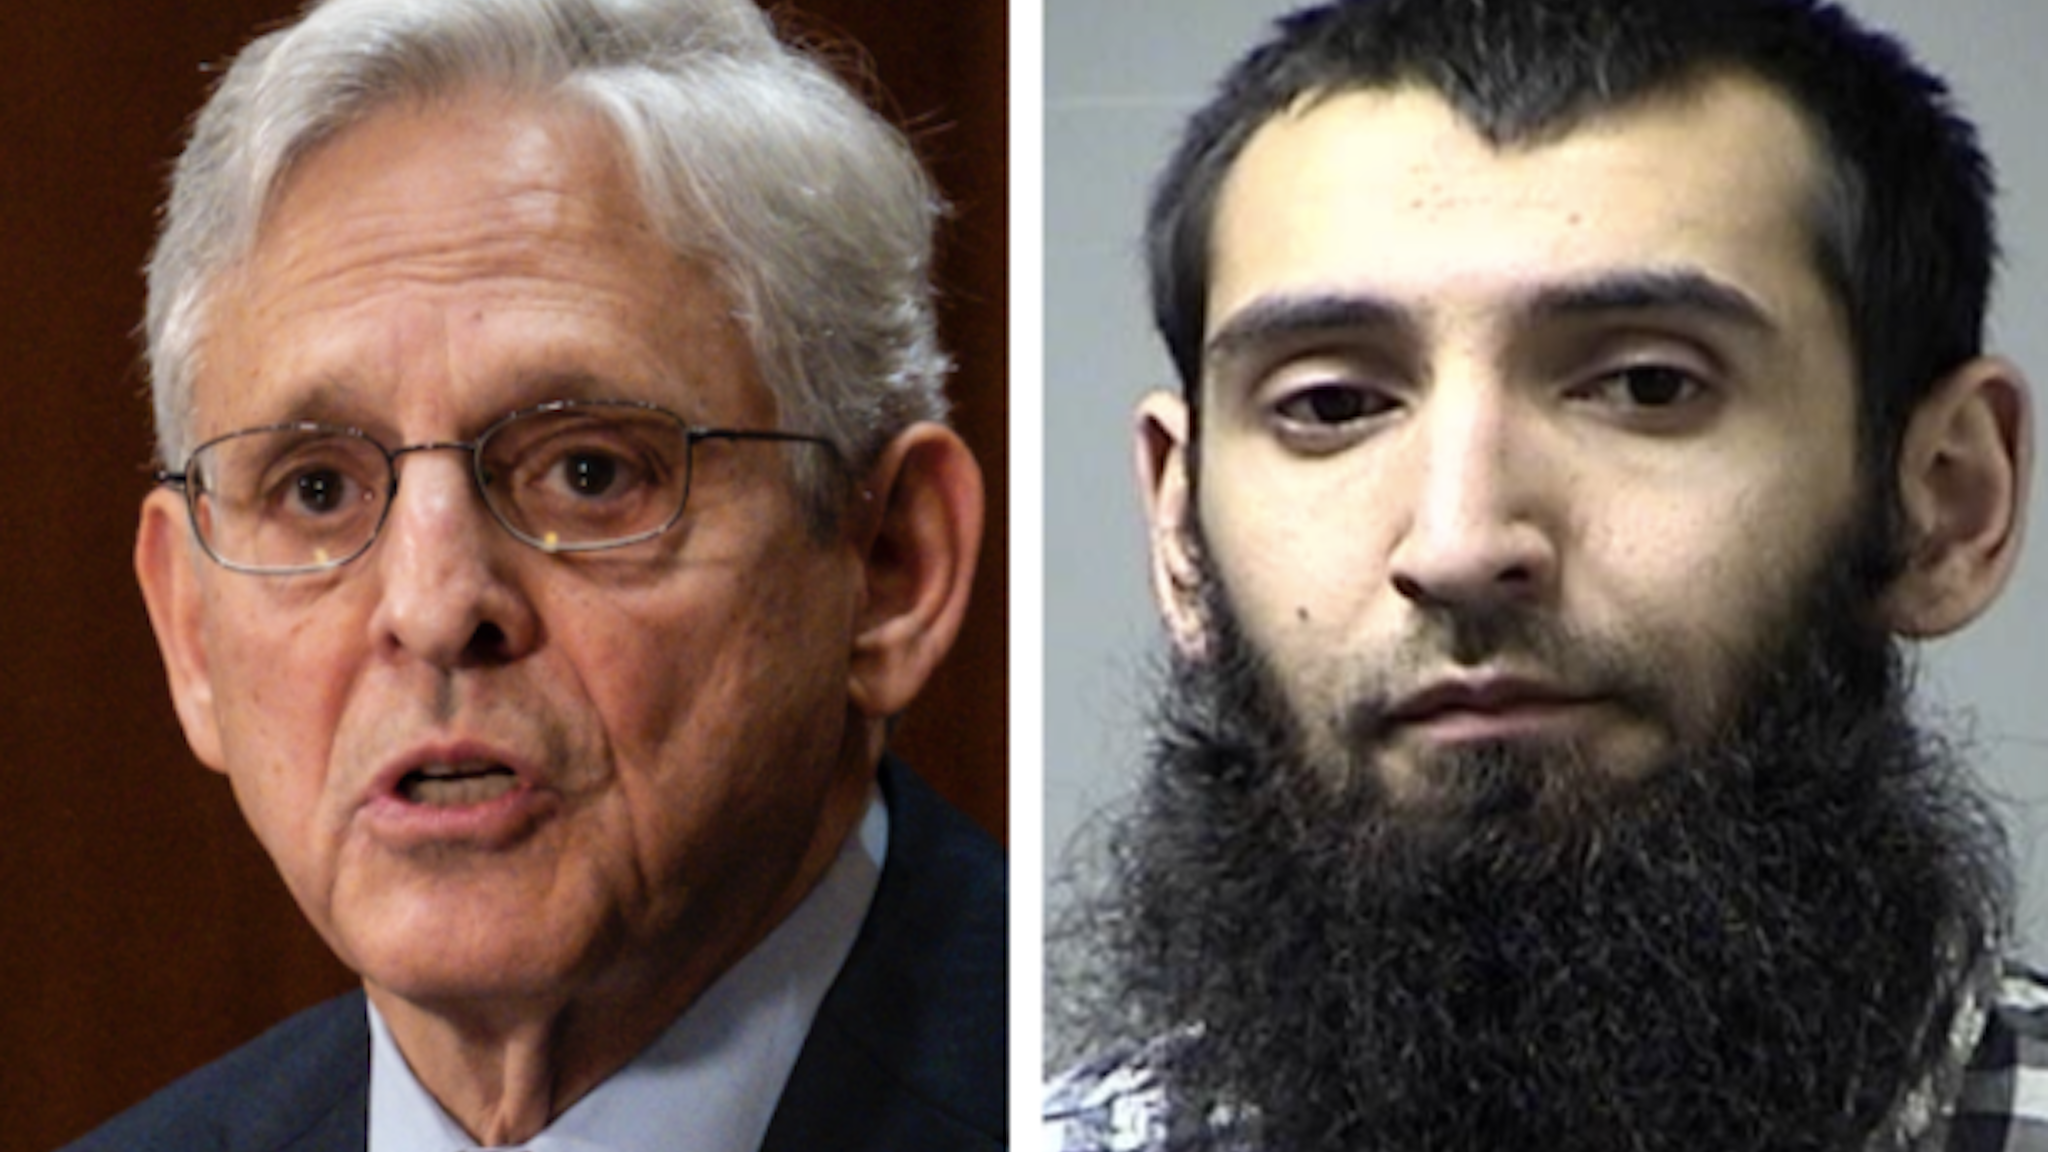 Attorney General Merrick Garland is bucking President Joe Biden by seeking the death penalty for Sayfullo Saipov, an alleged Islamist terrorist accused of killing eight and injuring more than a dozen in a 2017 New York City truck attack.